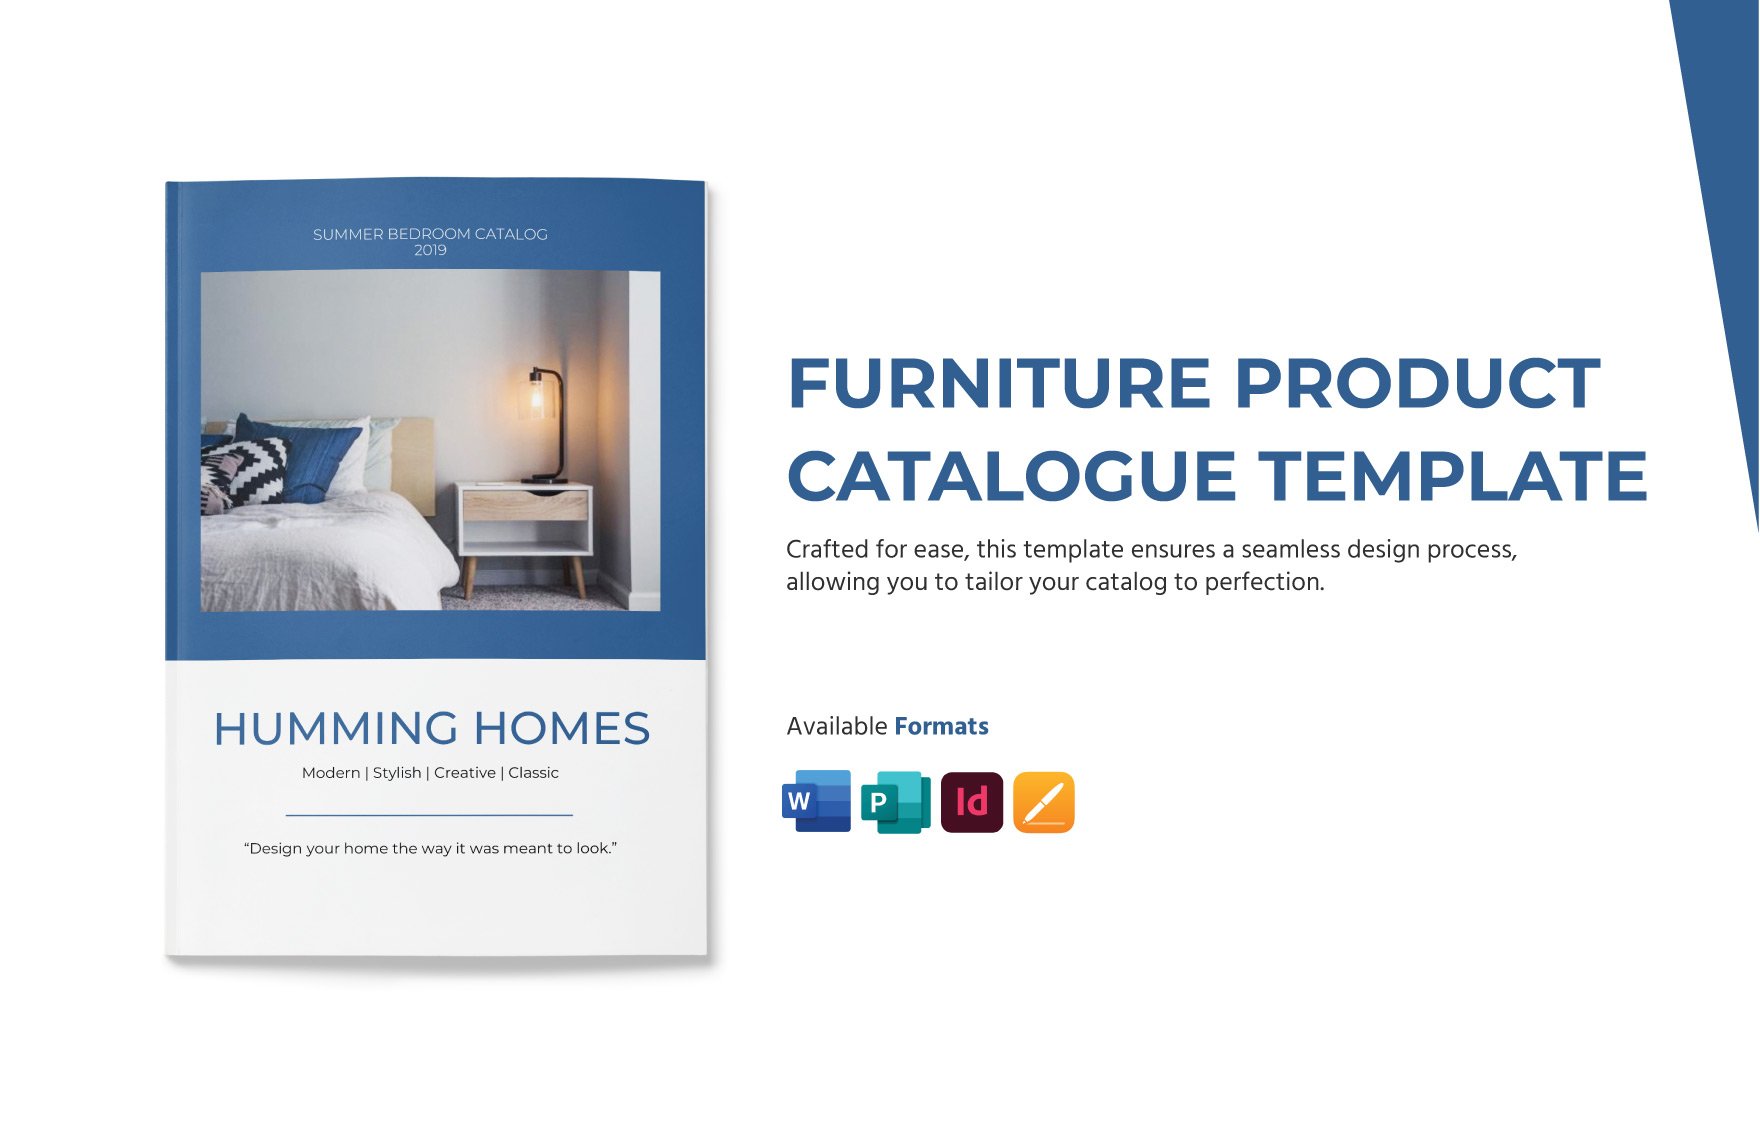 Furniture Product Catalogue Template in Word, Apple Pages, Publisher, InDesign